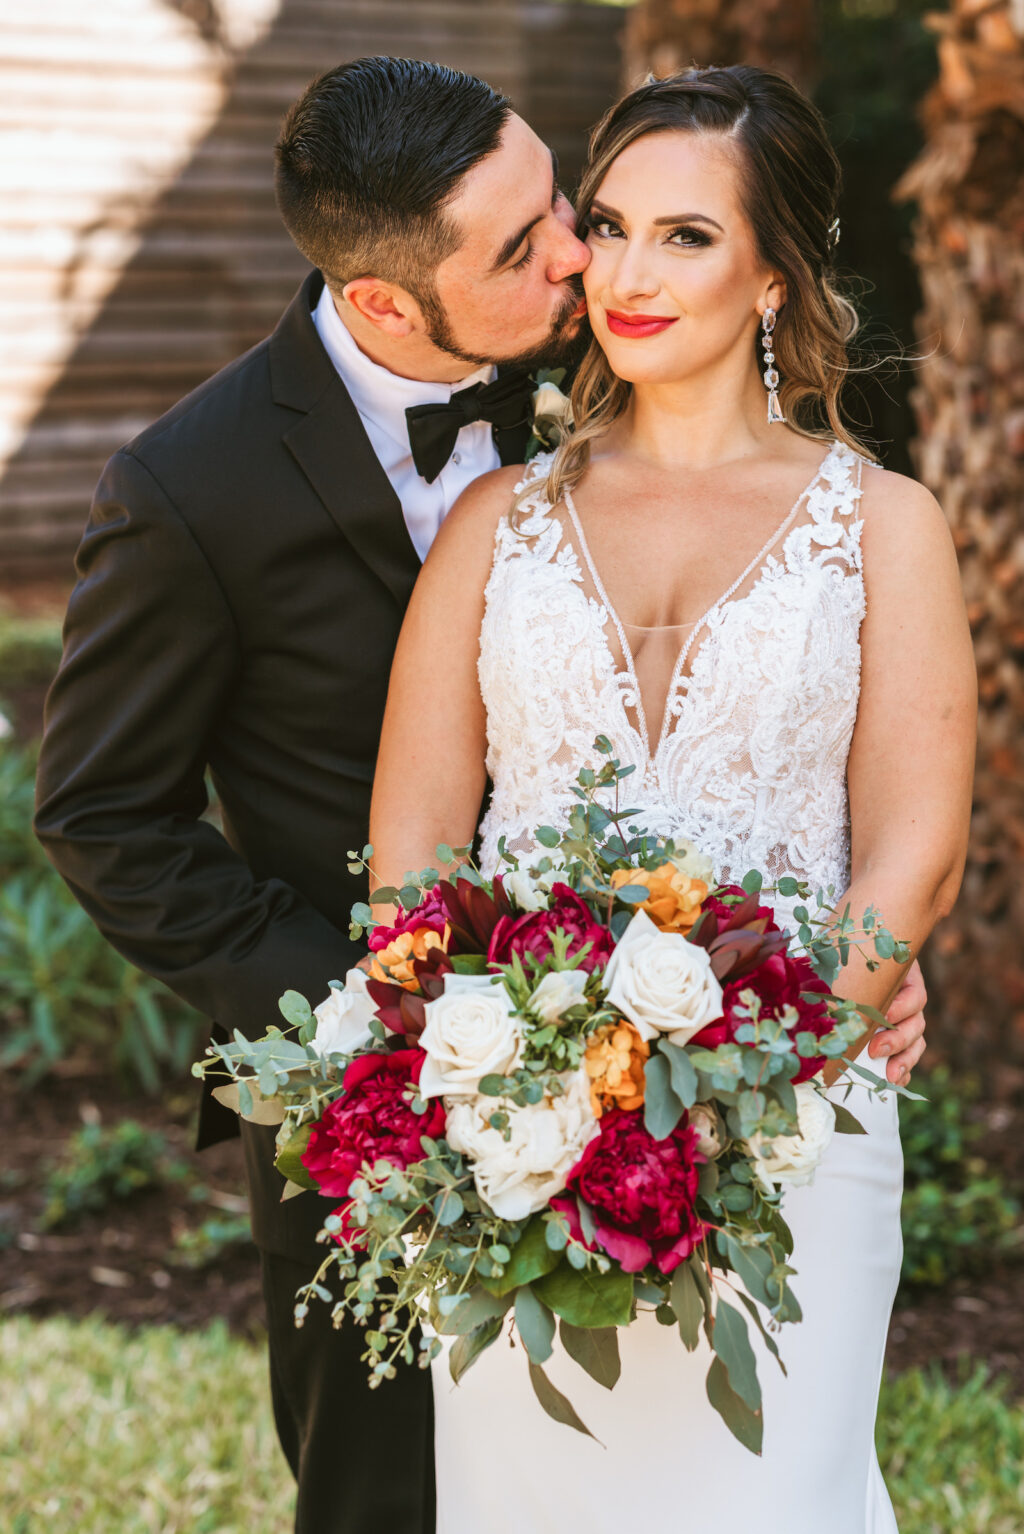 Florida bride wearing floral lace and illusion plunging v neckline wedding dress holding red and white roses, yellow flowers, greenery floral fall bouquet and groom kissing bride on cheek portrait | Tampa Bay wedding photographer Bonnie Newman Creative | Wedding florist Iza’s Flowers Wedding hair and makeup Femme Akoi